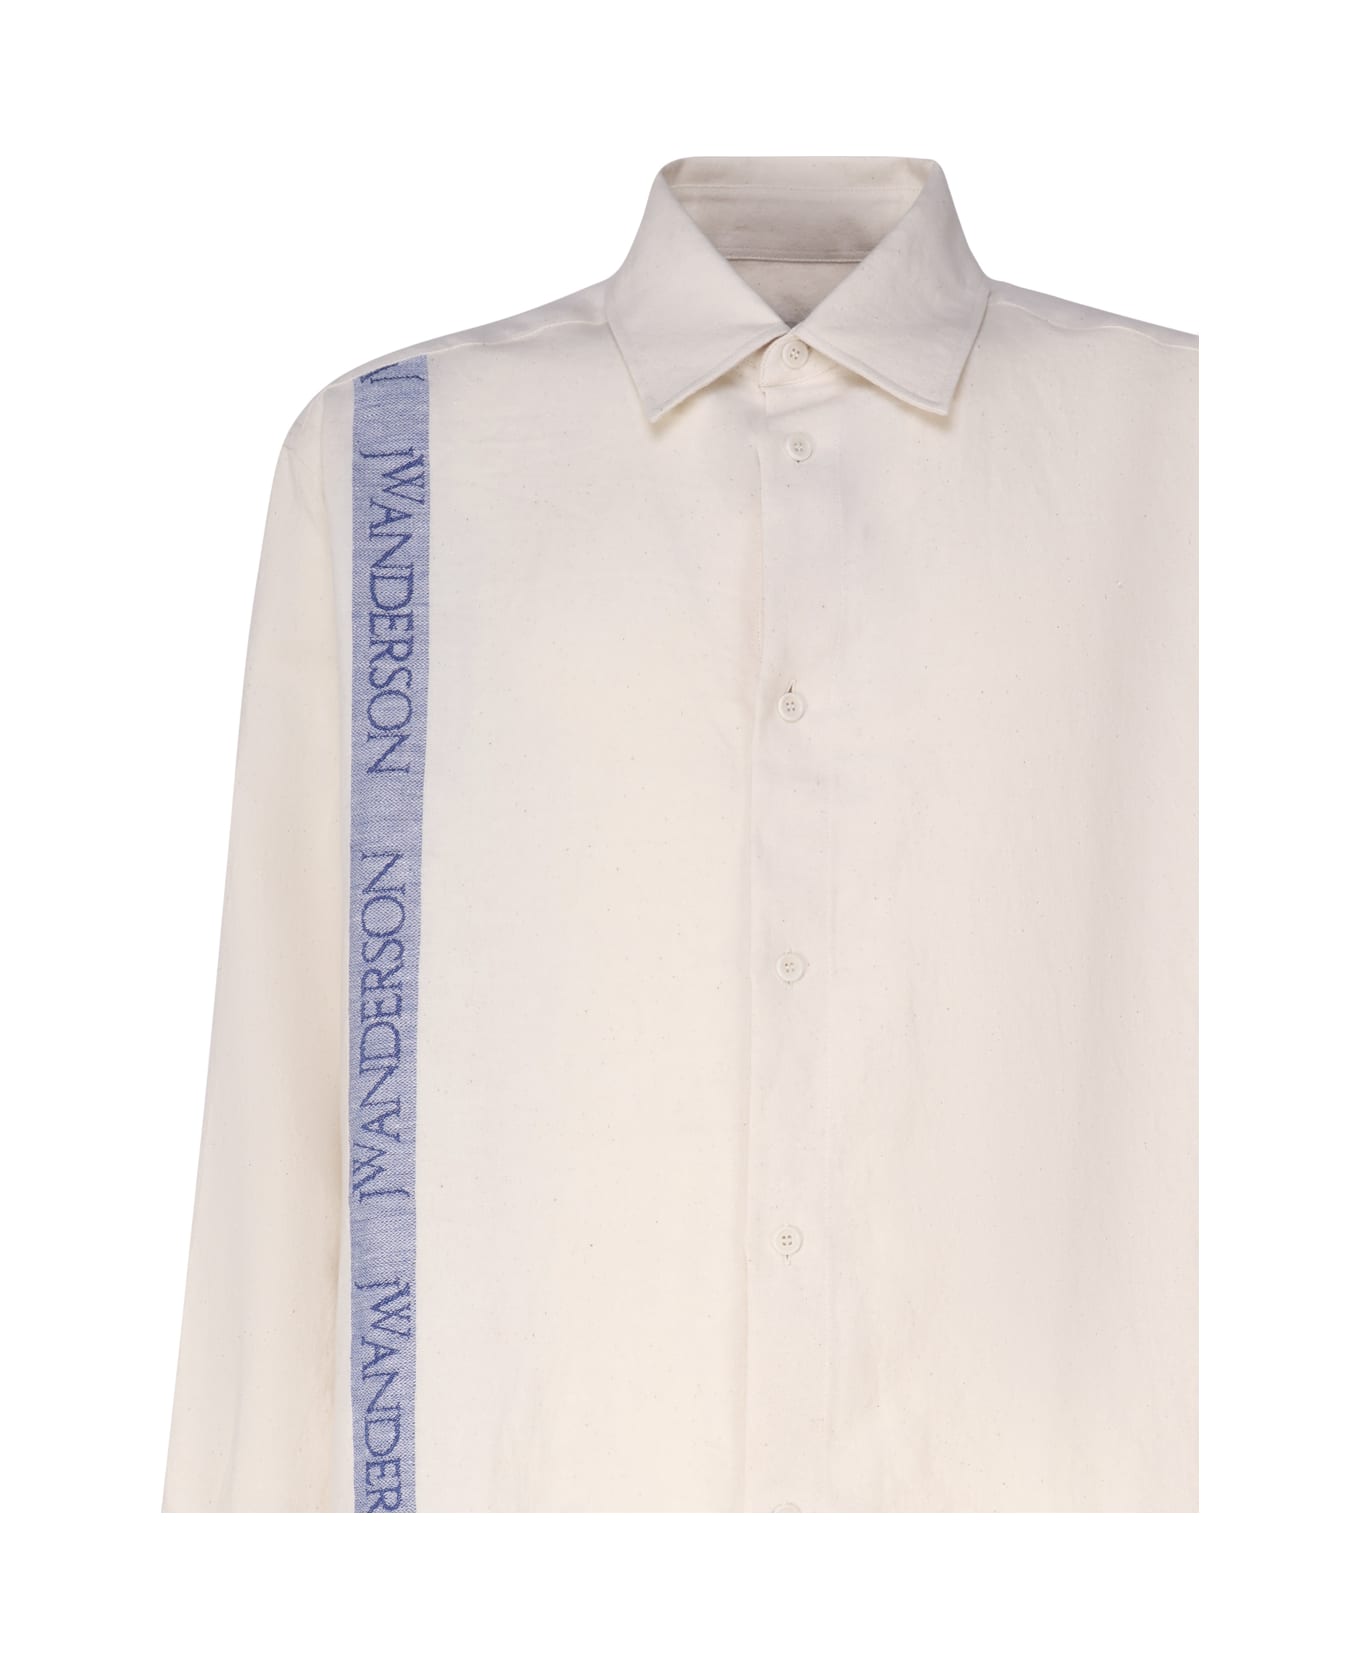 J.W. Anderson Shirt With Anchor Embroidery - Ivory